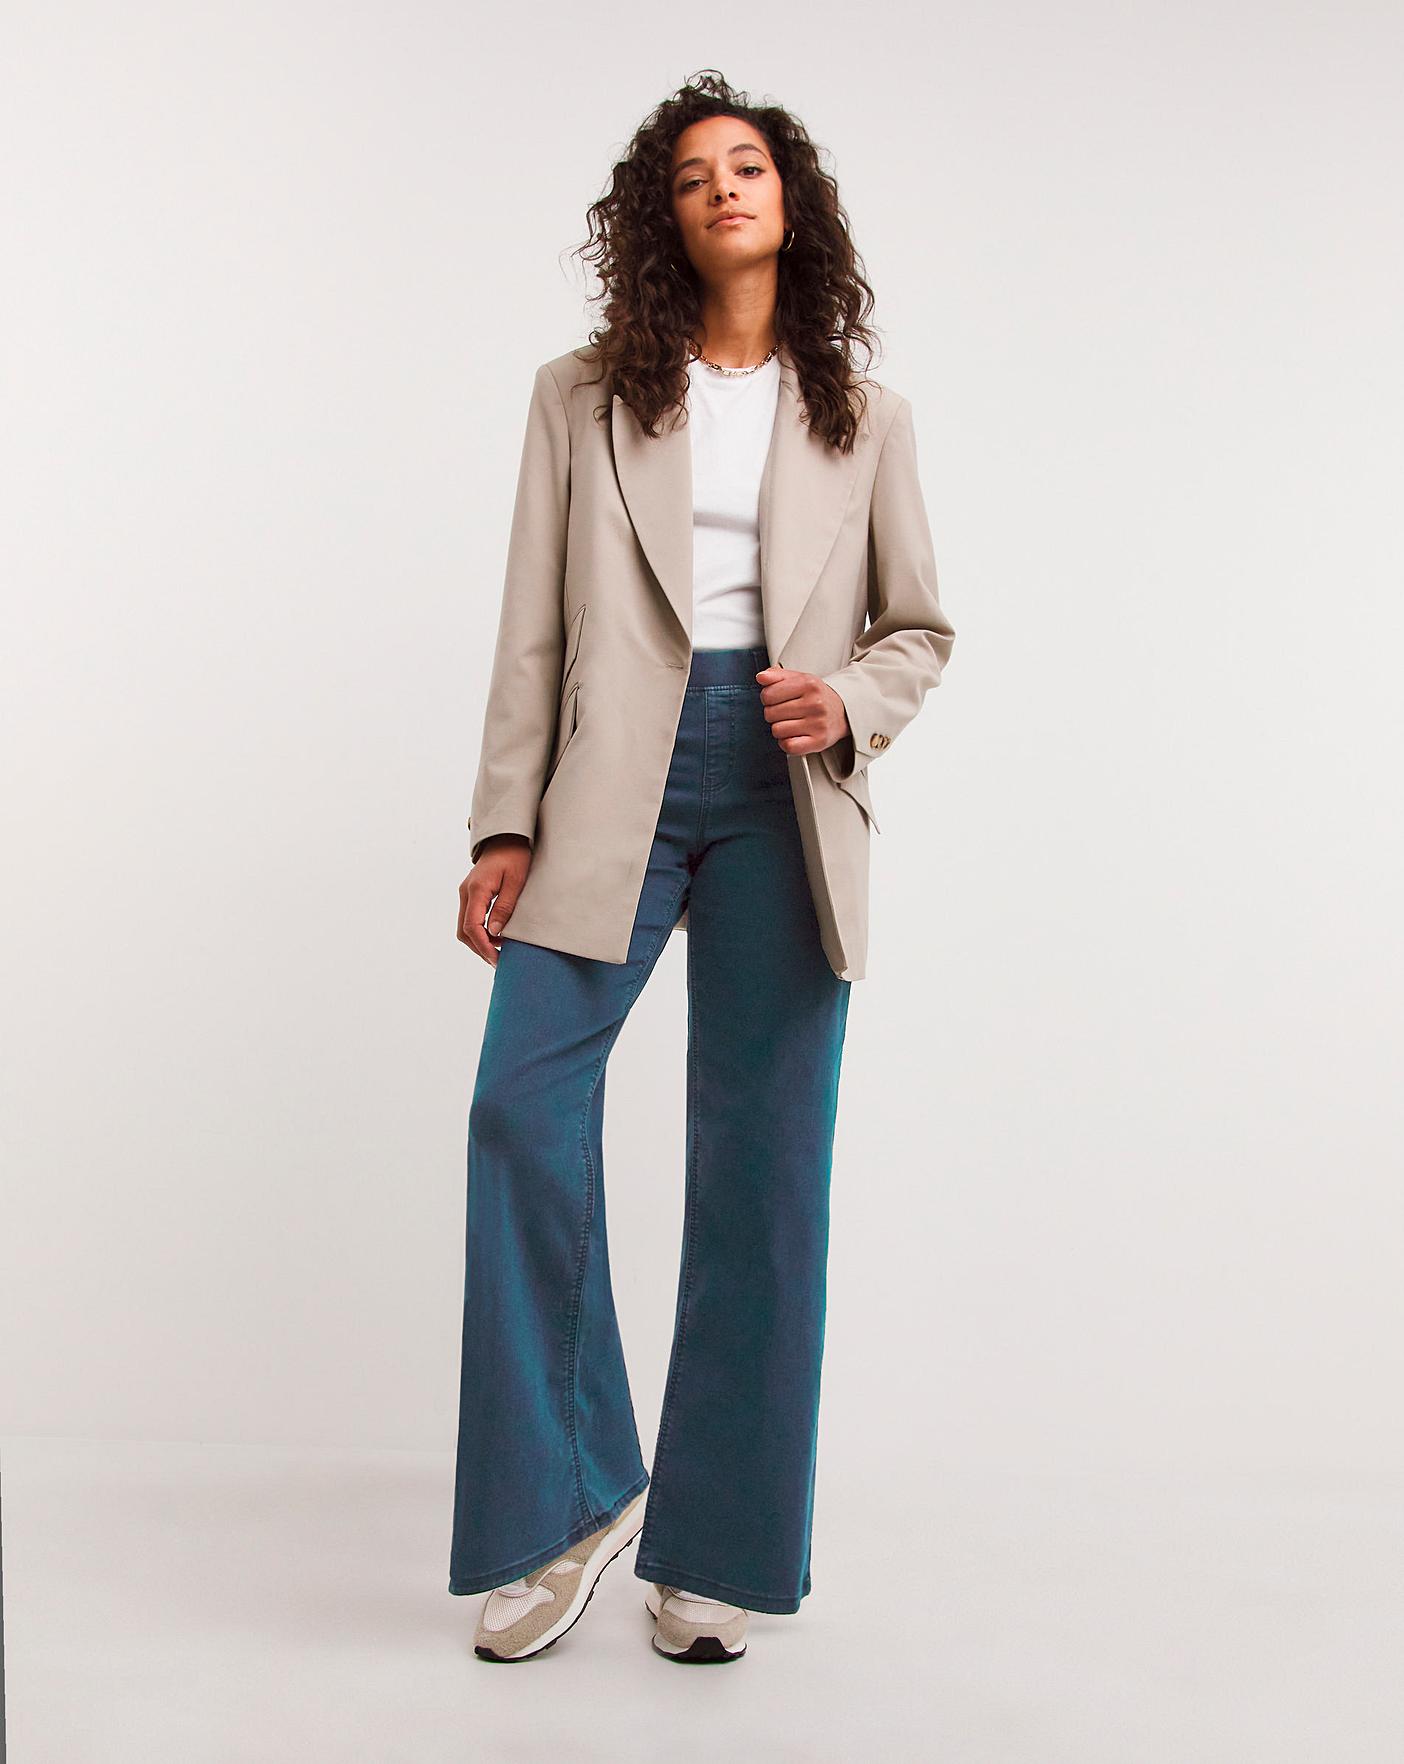 Add Style and Comfort to Your Wardrobe with Broad Belted Jeggings